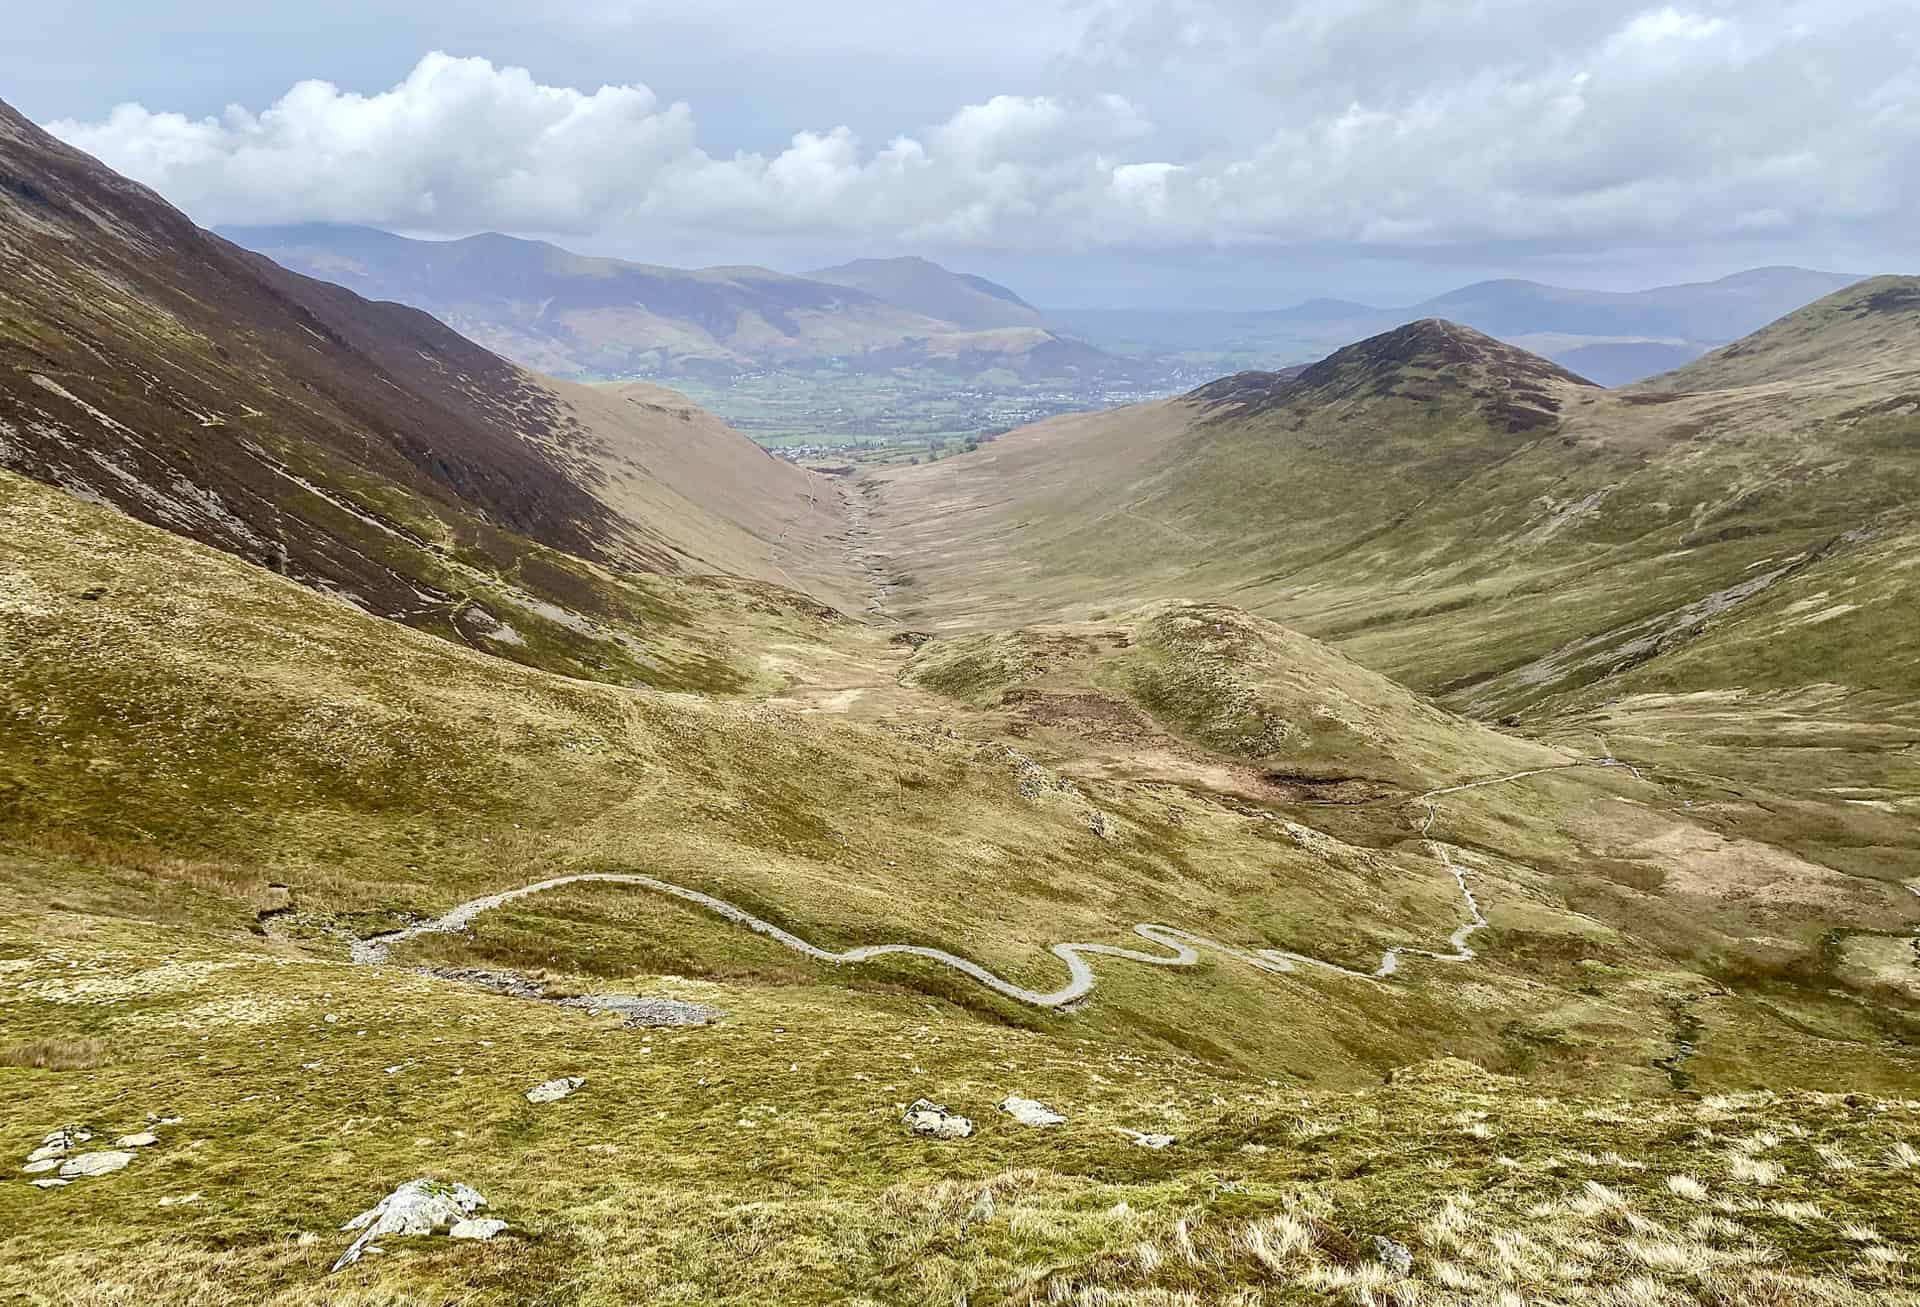 The winding path down to Force Crag Mine, and the shallow U-shaped valley between Grisedale Pike (left) and Outerside (right). Coledale Beck meanders its way along the valley floor to Braithwaite and joins Newlands Beck just west of the village.